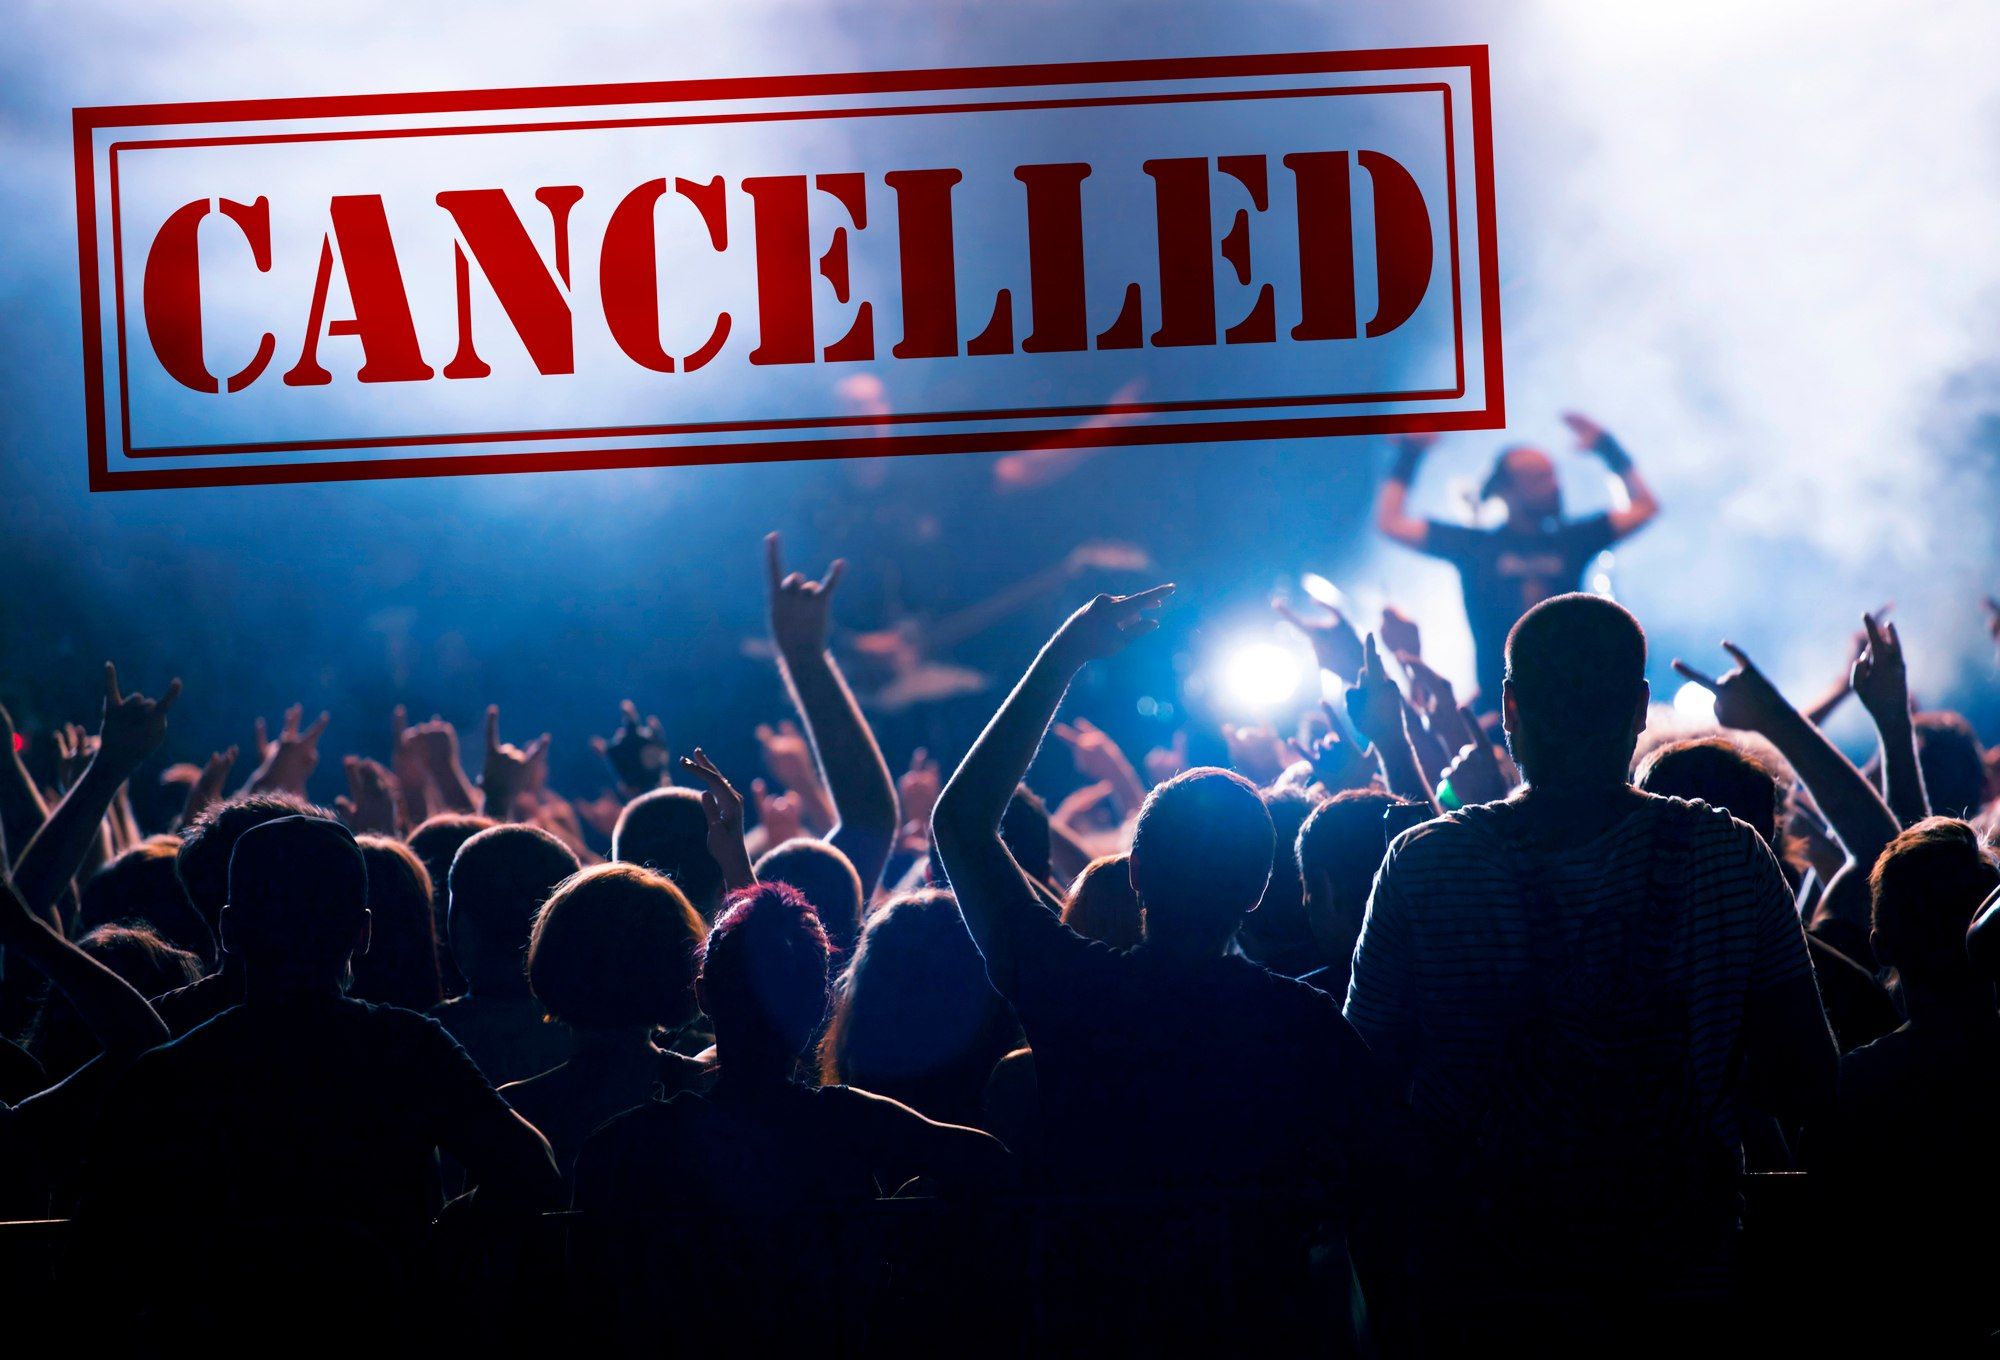 "Cancelled" stamped over a photo of a crowd at a concert - vivid seats